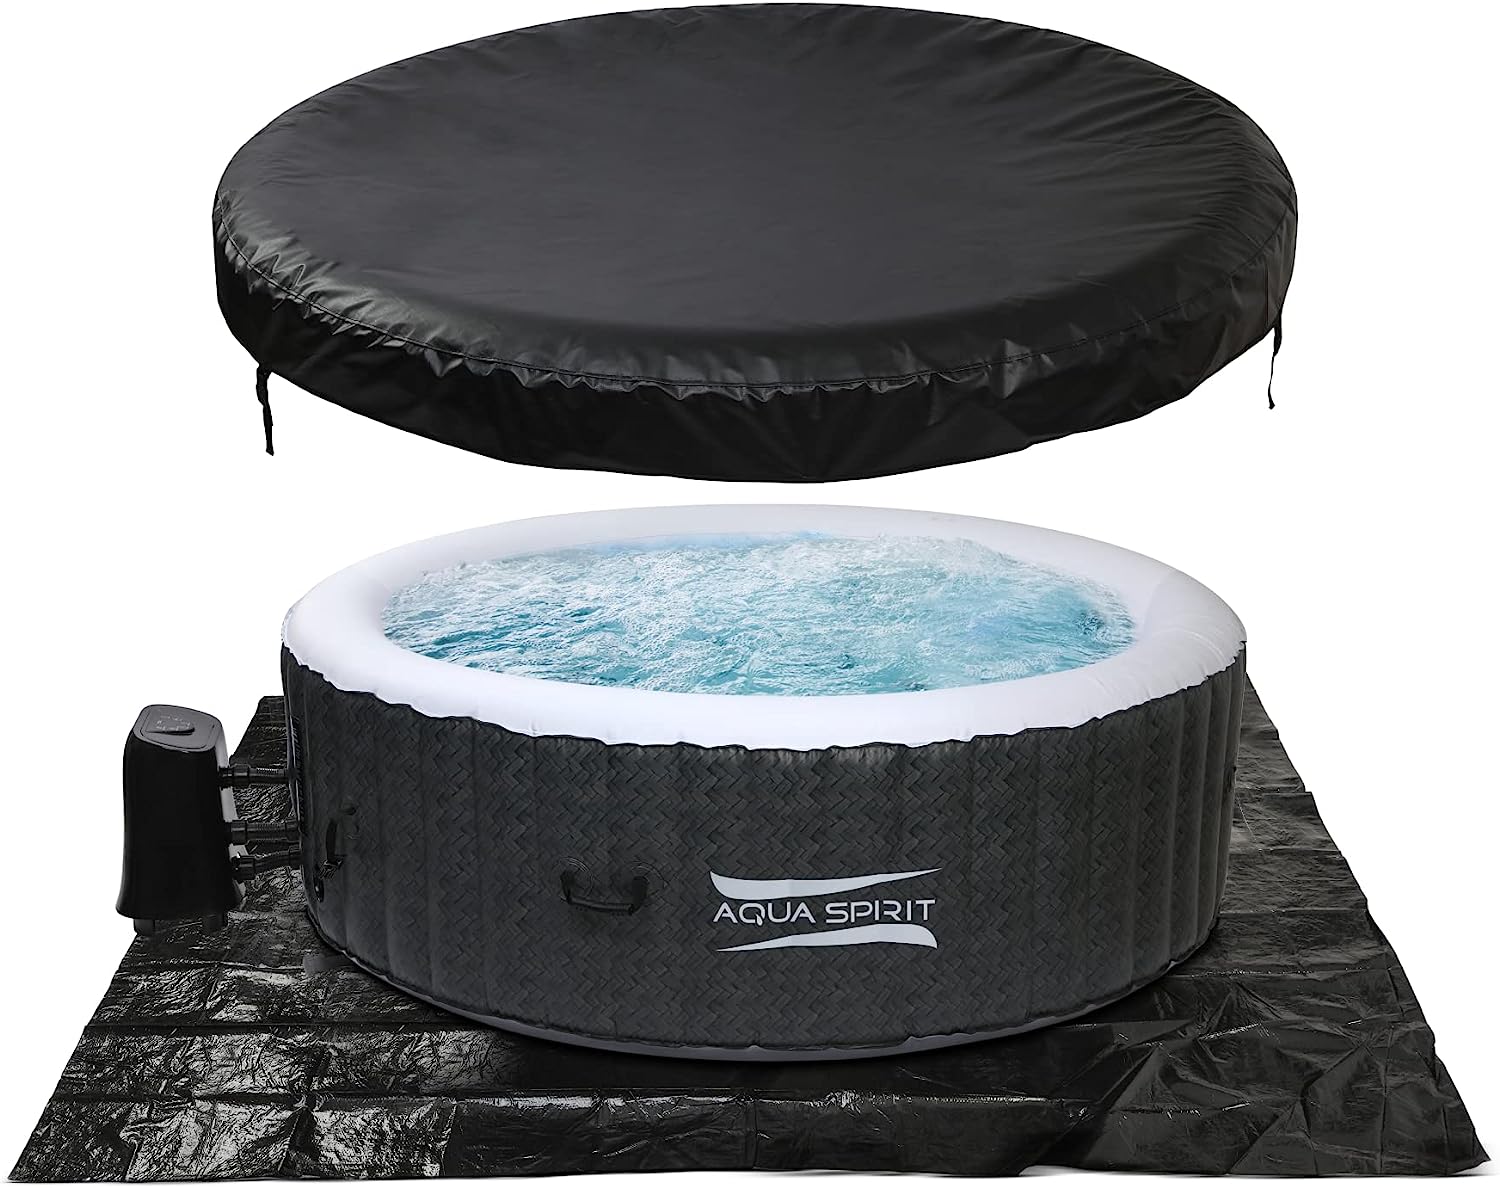 Aqua Spirit 4 to 6 Person Inflatable Quick Heating Indoor & Outdoor Round Bubble Hot Tub Spa with Insulated Cover & Ground Sheet, Up to 6 Persons, Rattan Effect - Aqua Spirit iSUPs UK